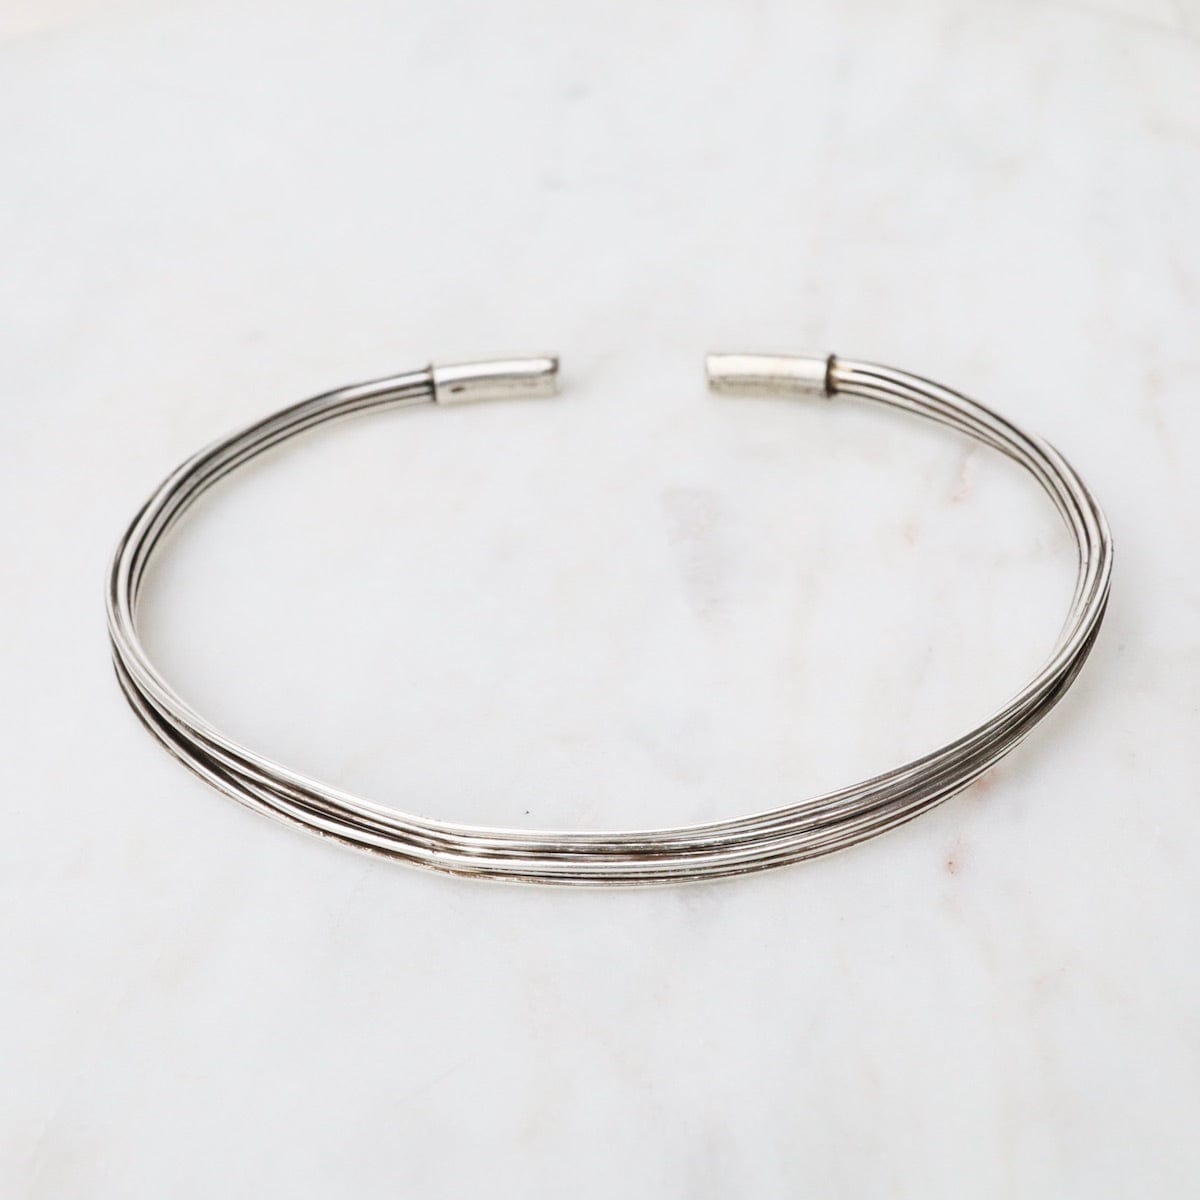 BRC Elephant Hair Inspired Cuff - Oxidized Sterling Silver - 10 Lines